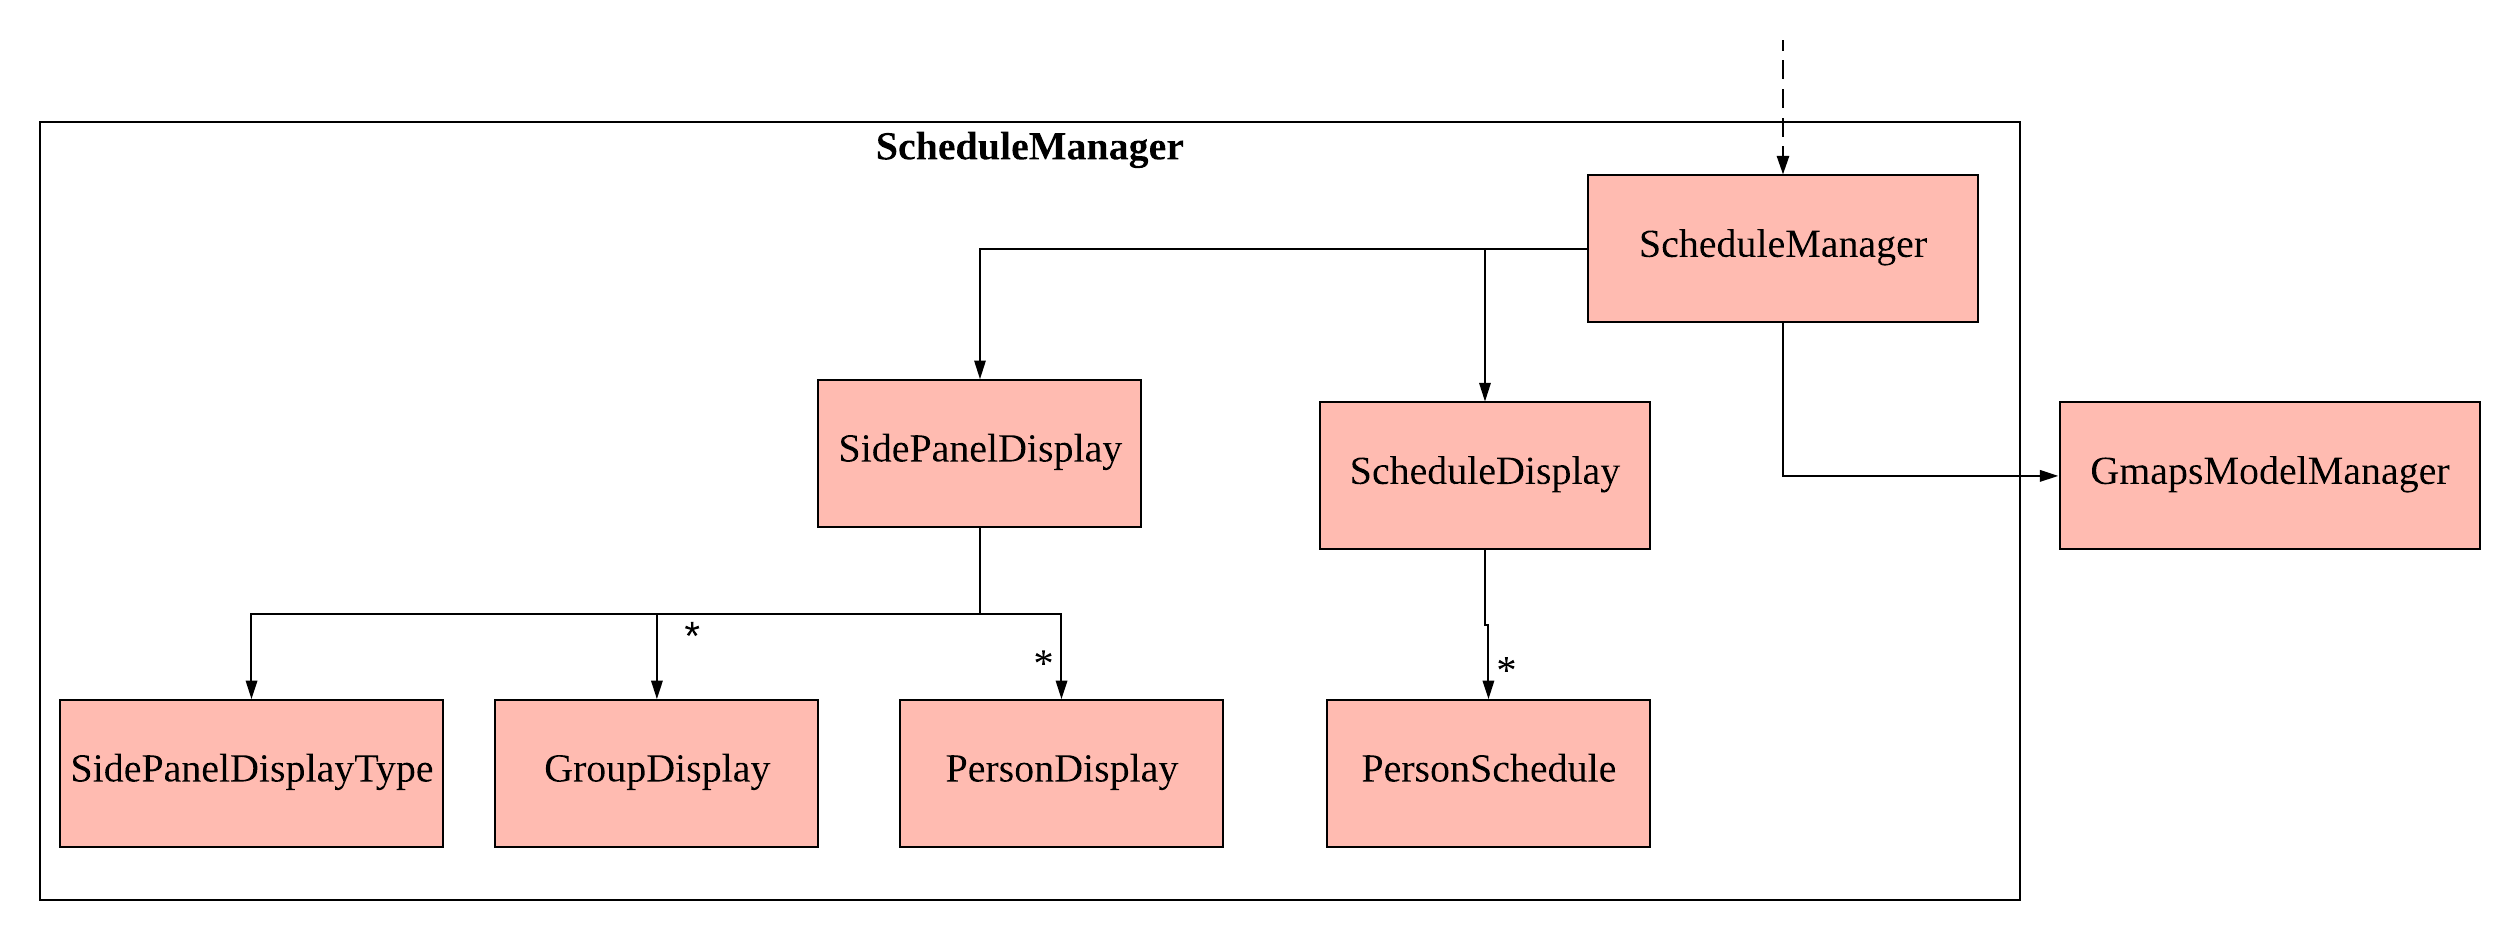 ScheduleManagerClassDiagram.png